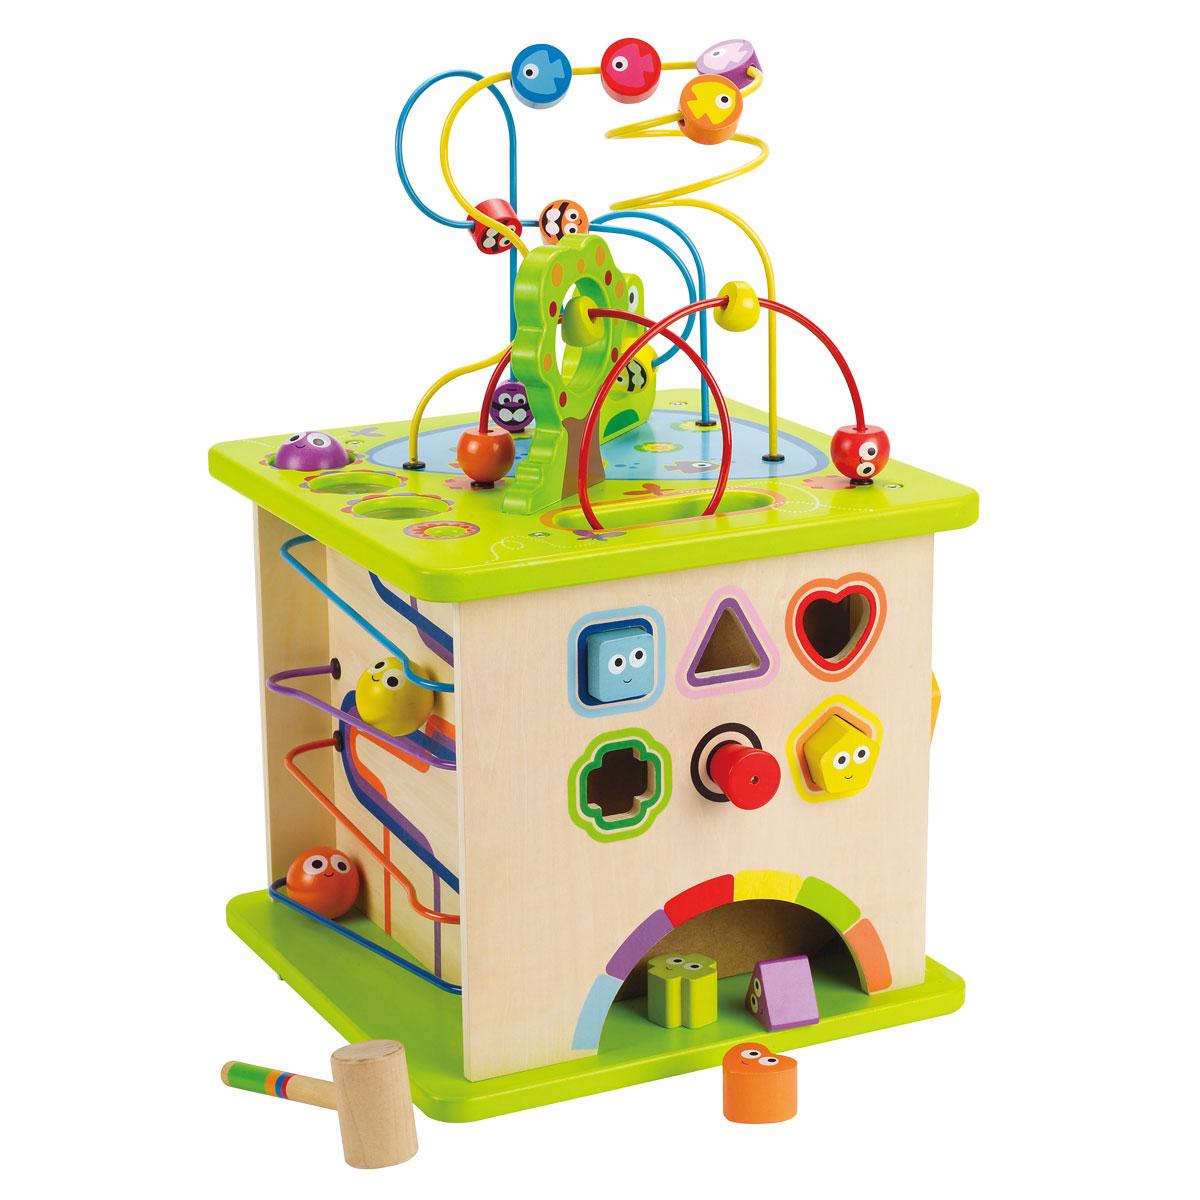 Hape Country Critter Play Activity Cube